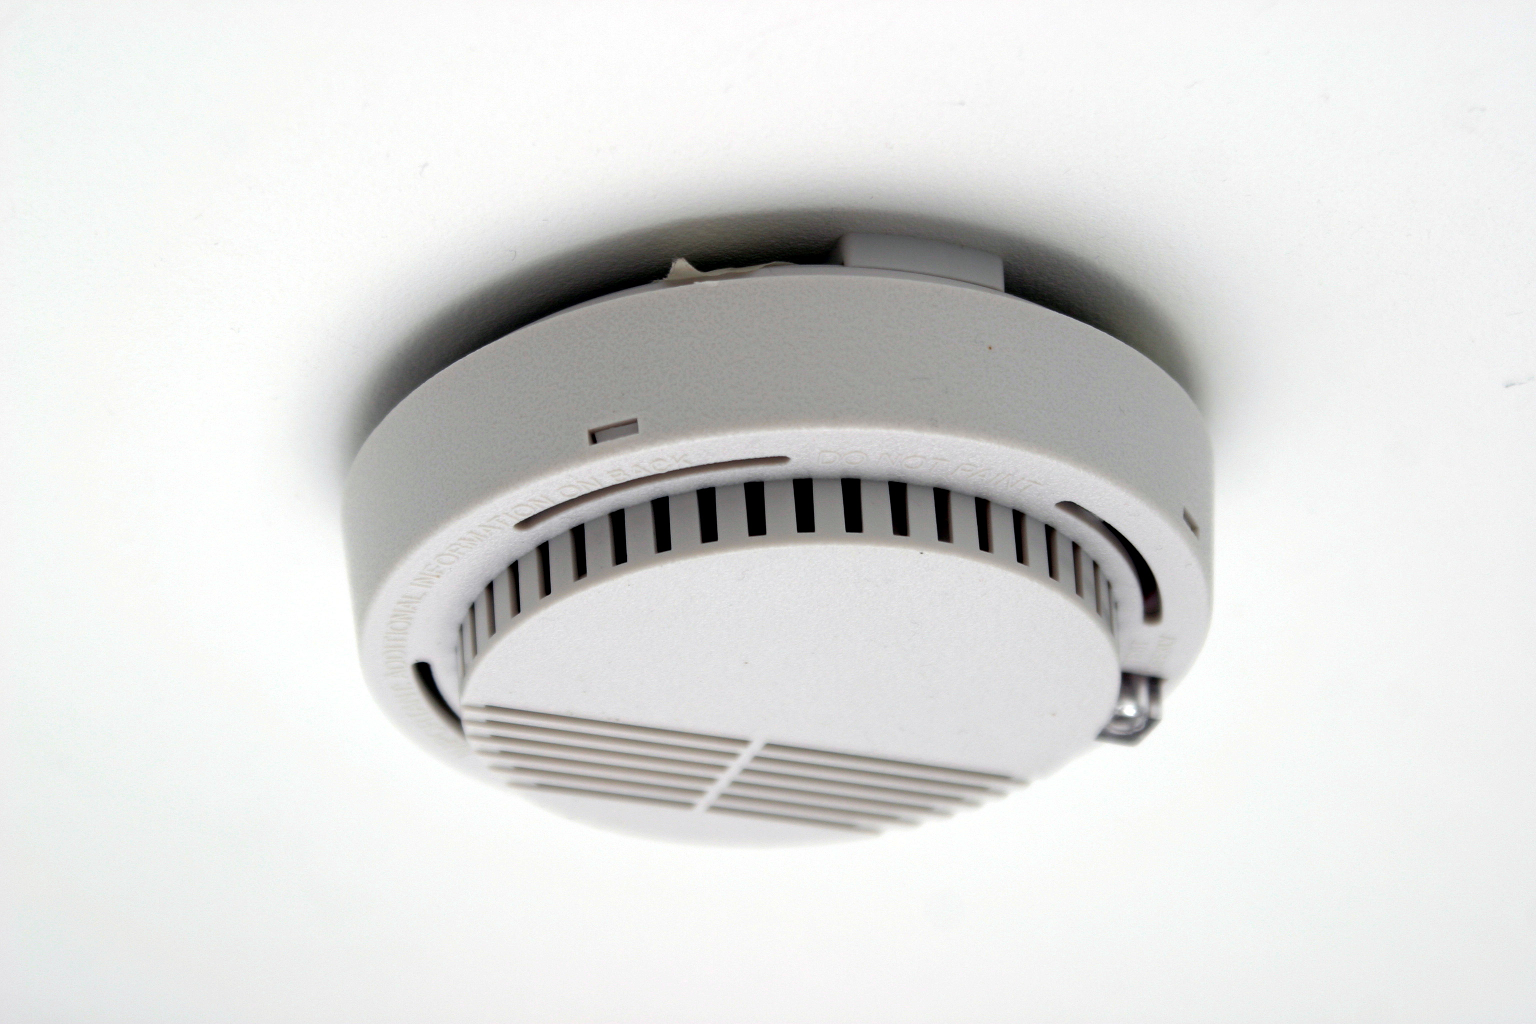 Smoke Detector Market 2021-26: Demand, Trends, Scope, Growth And Analysis